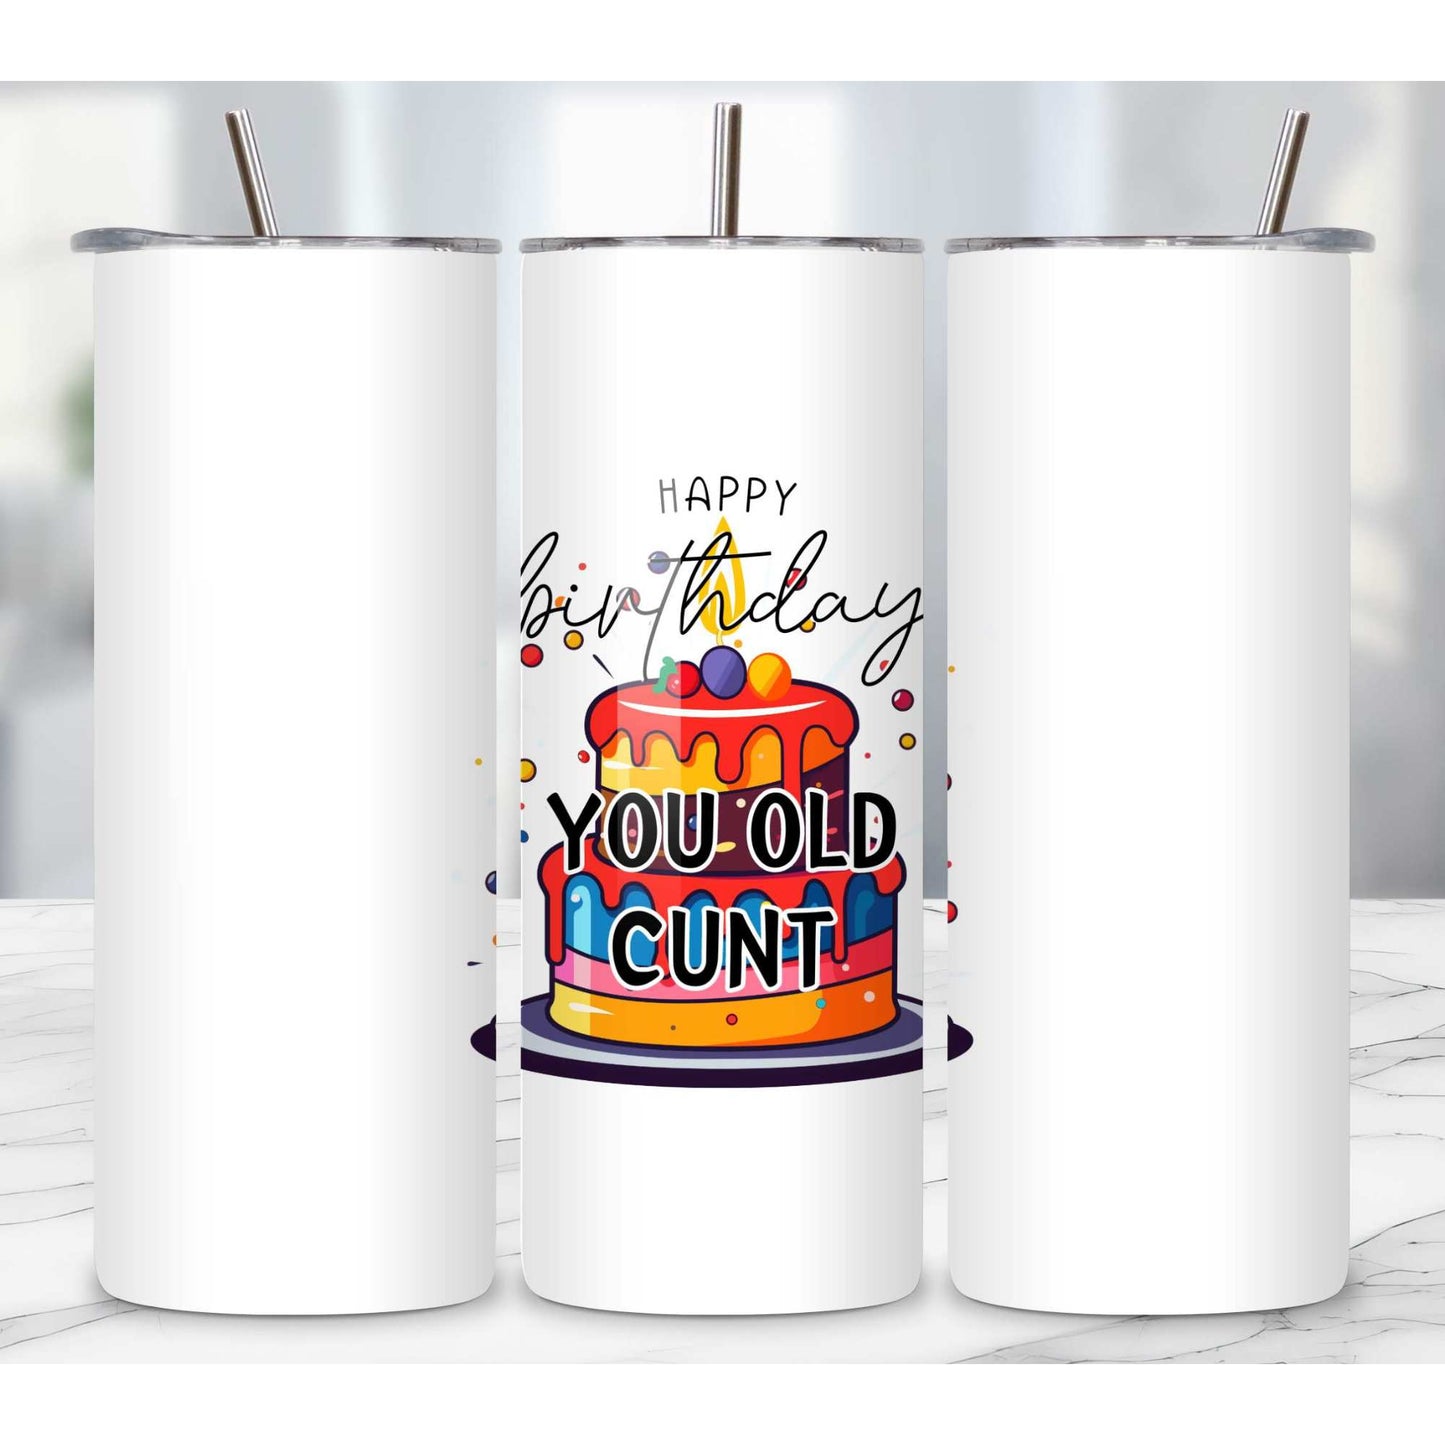 Happy Birthday You Old Cunt - Hilarious Birthday Mug, Tumbler, Coaster Gift for Friends and Work Besties